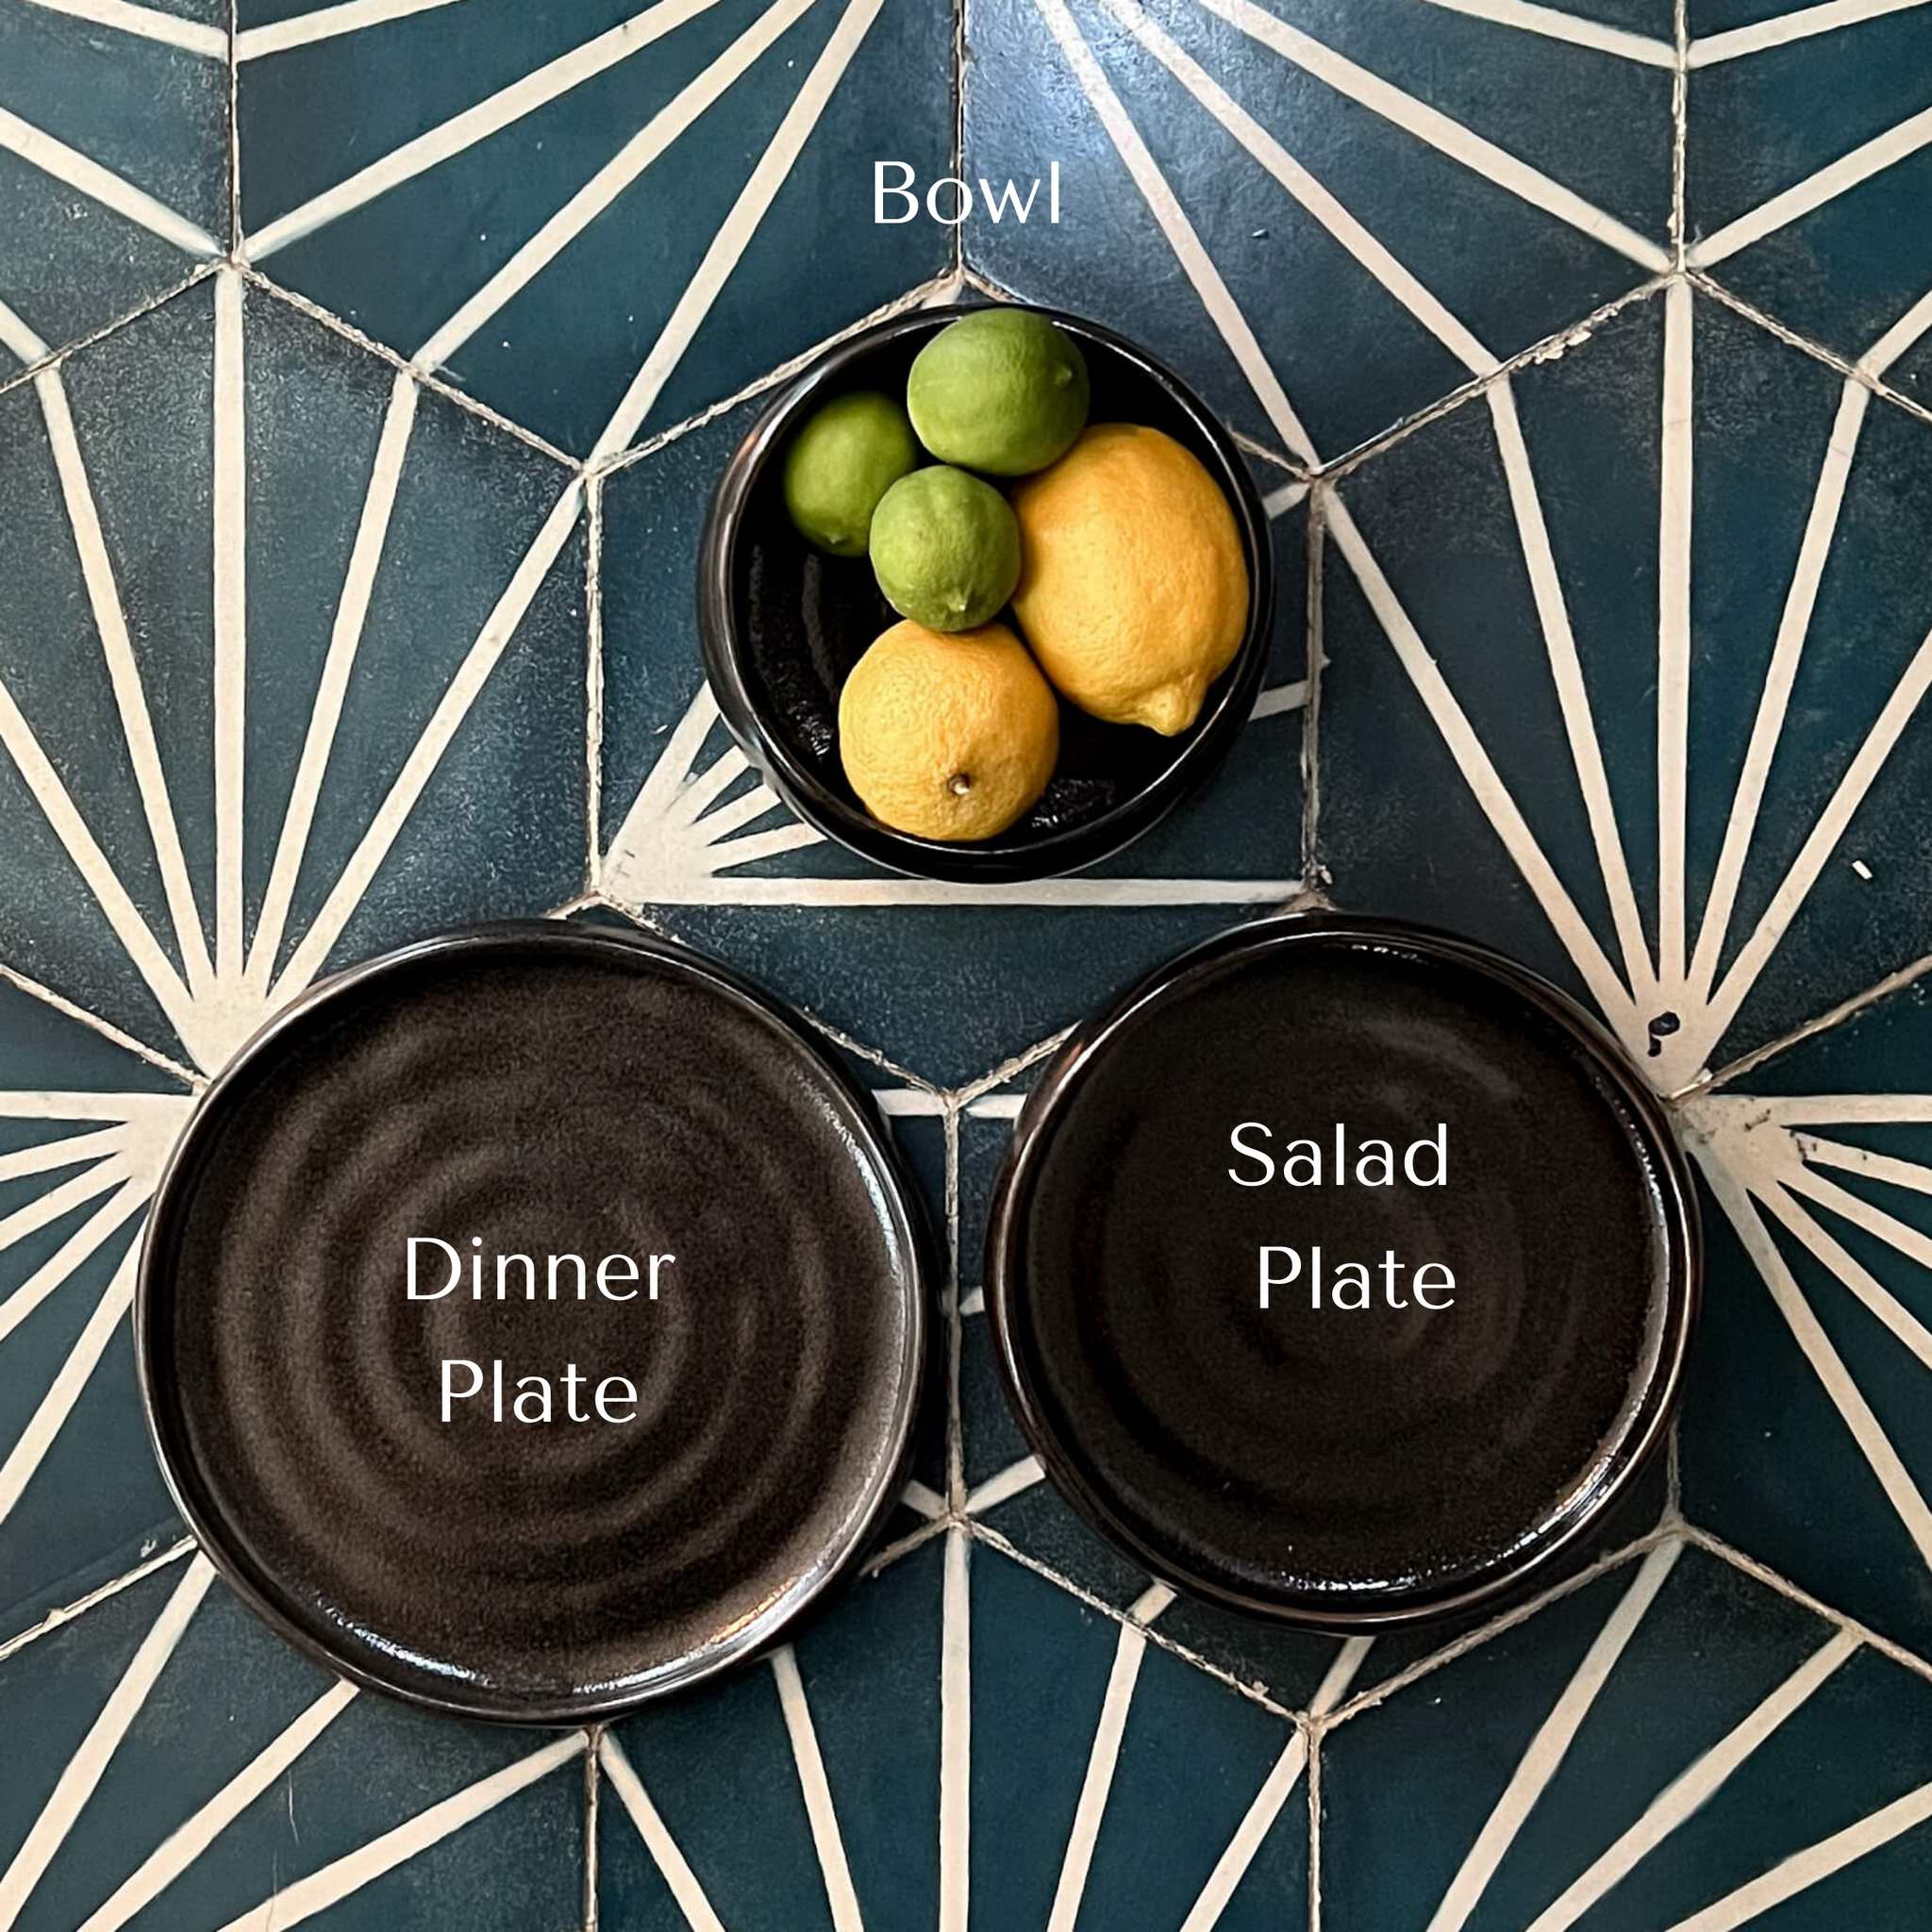 A set of black stoneware dishes including a dinner plate, salad plate and bowl made in Mexico.